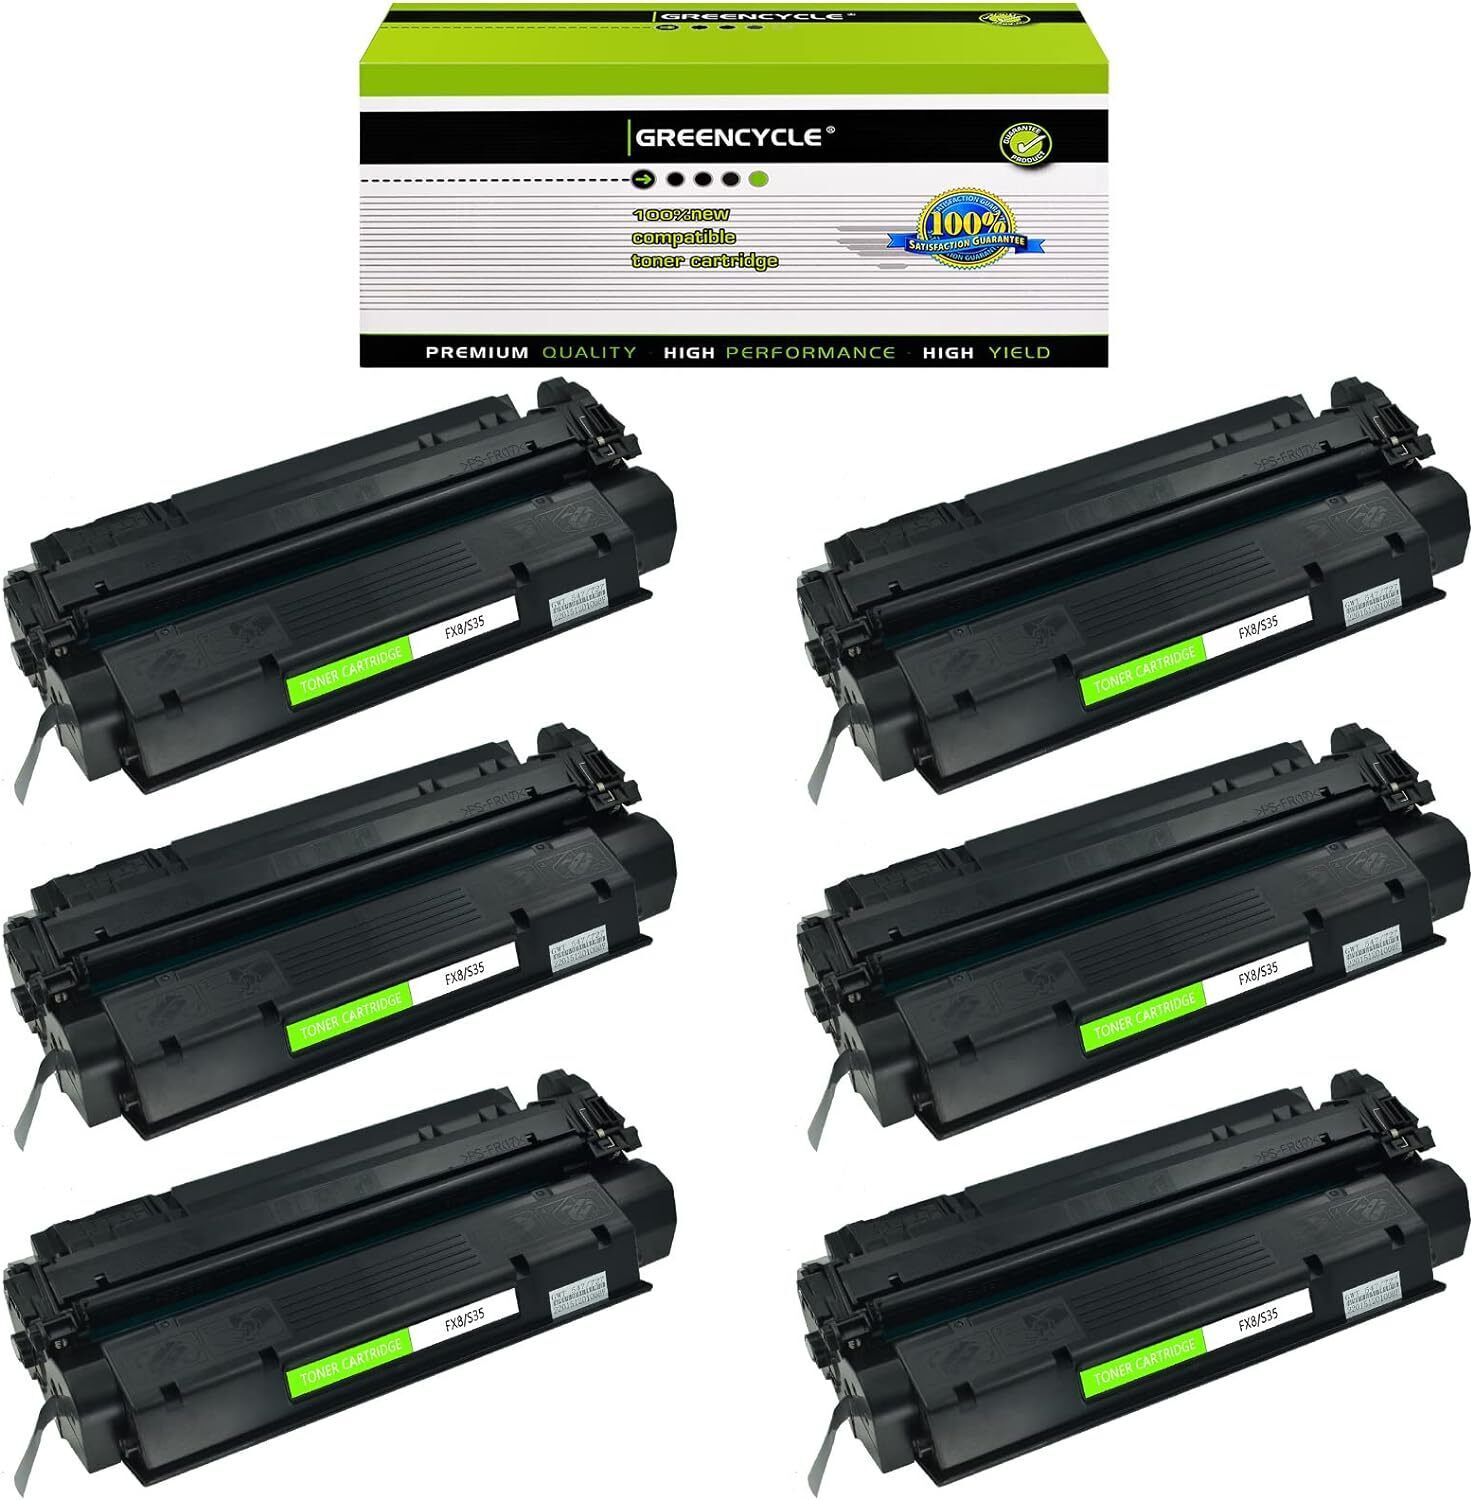 6PK GREENCYCLE S35 S-35 Toner Cartridge Fit for Canon FAXPHONE ICD-340 L170 L400